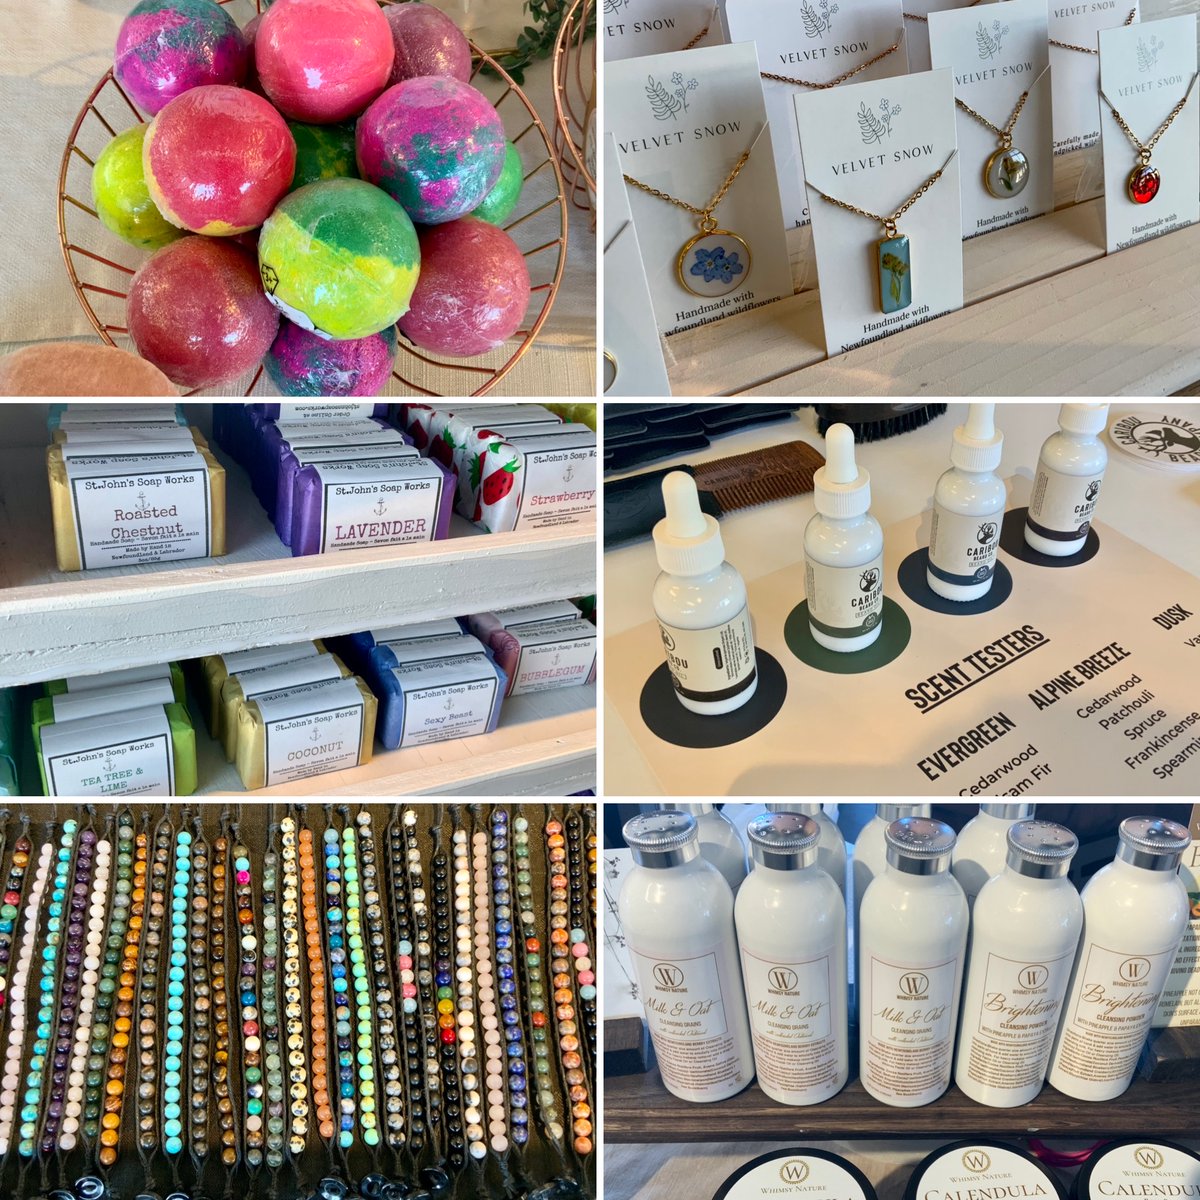 Give yourself a special you day with some jewellery and spa style items! We have a wide range of products here today during the Saturday Feb 24th market.  #sjfmnl #sjfm #jewellery #soap #bathitems #skincare #beardcare #madehere